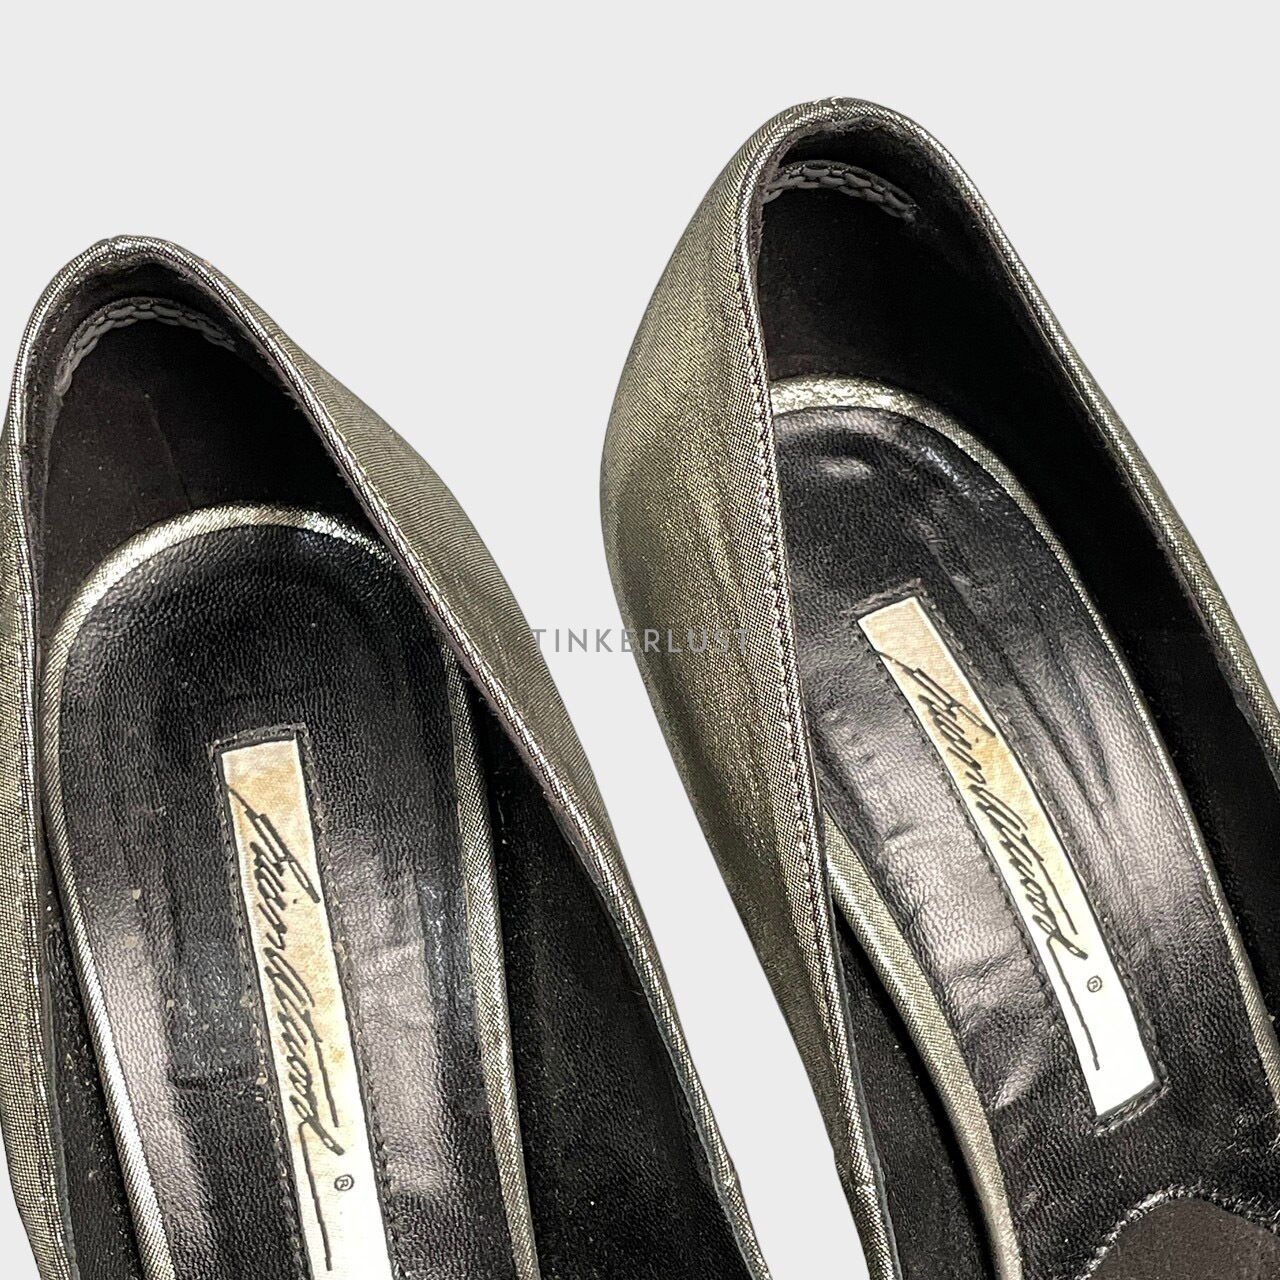 Brian Atwood Silver Open Toe Heels